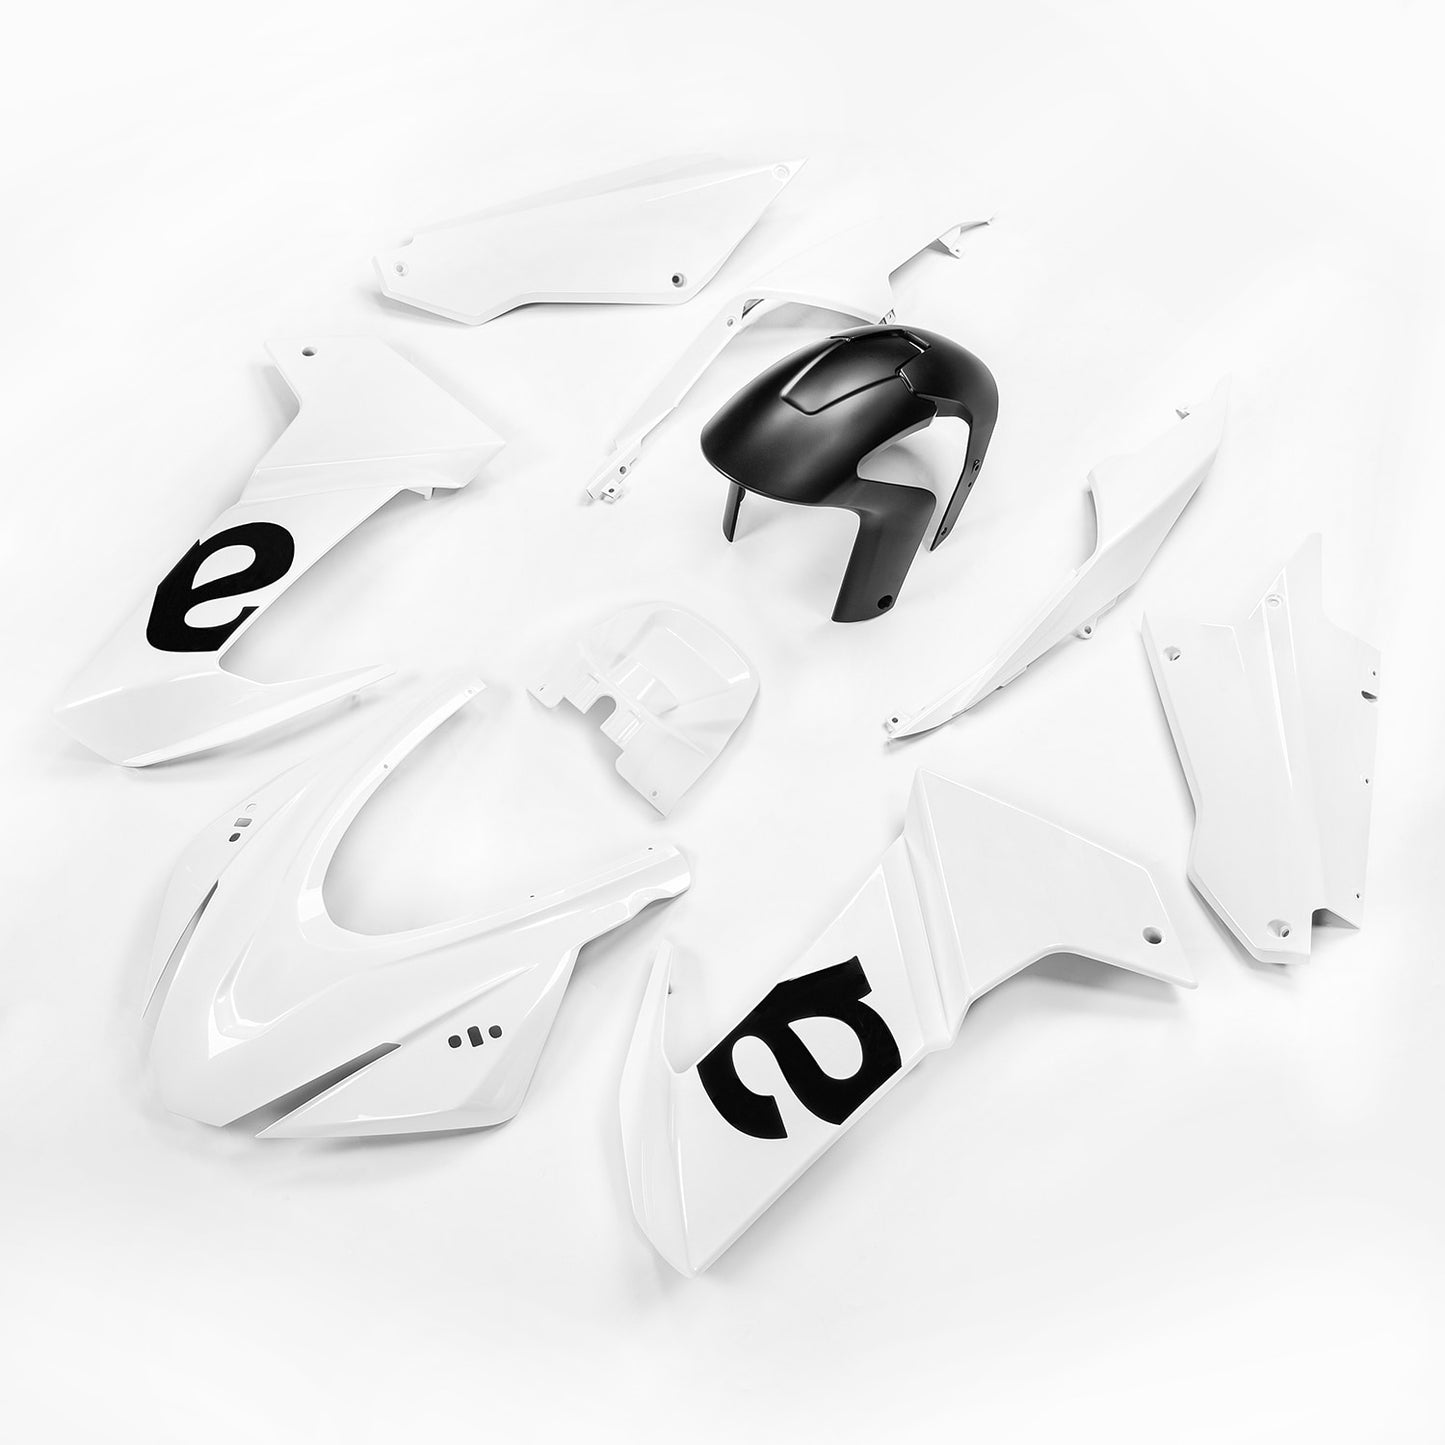 RS660 Fairing Bobywork For Aprilia RS 660 2020 2021 2022 2023 ABS Injection Molding Fairings Accessories Motorcycle Parts Frame Protector Kits